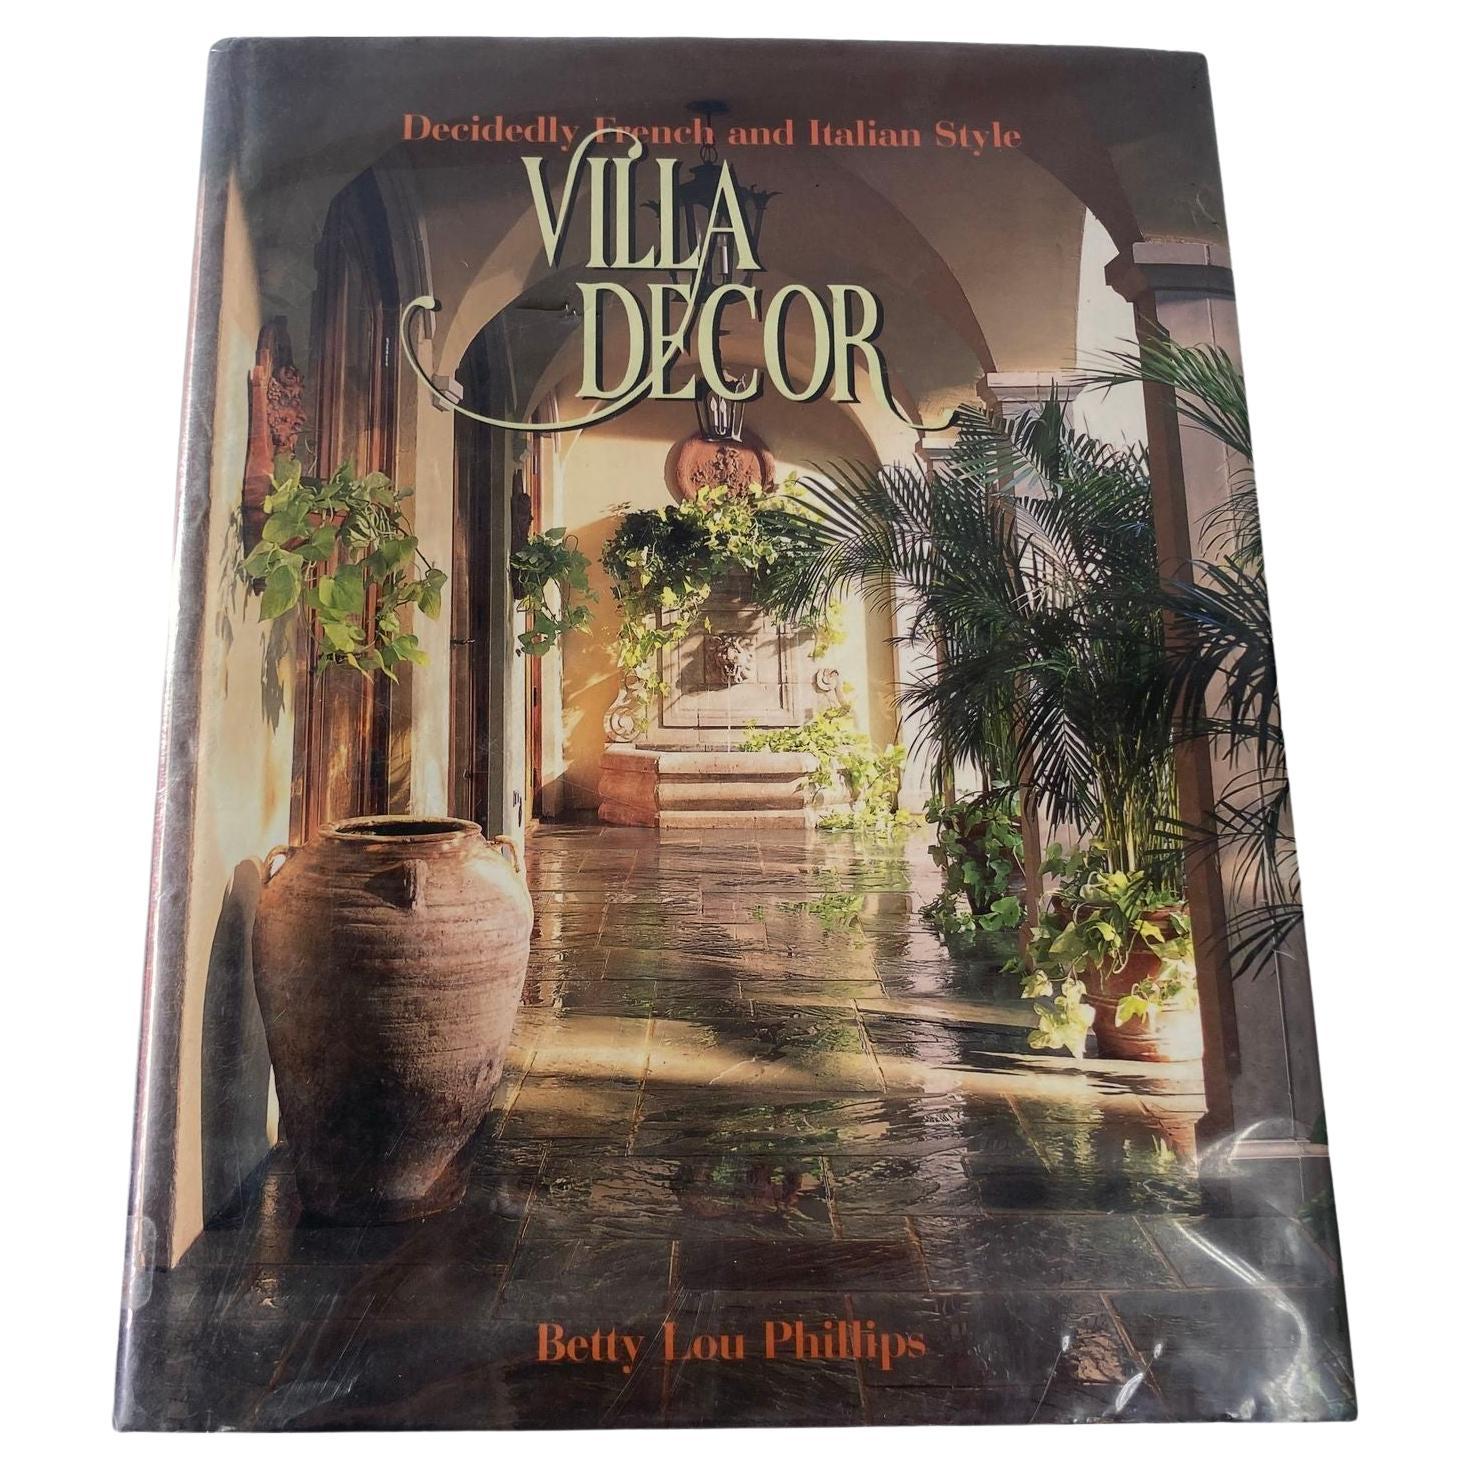 Décoration VILLA : Decidedly French and Italian Style Hardcover by Betty Lou Phillips